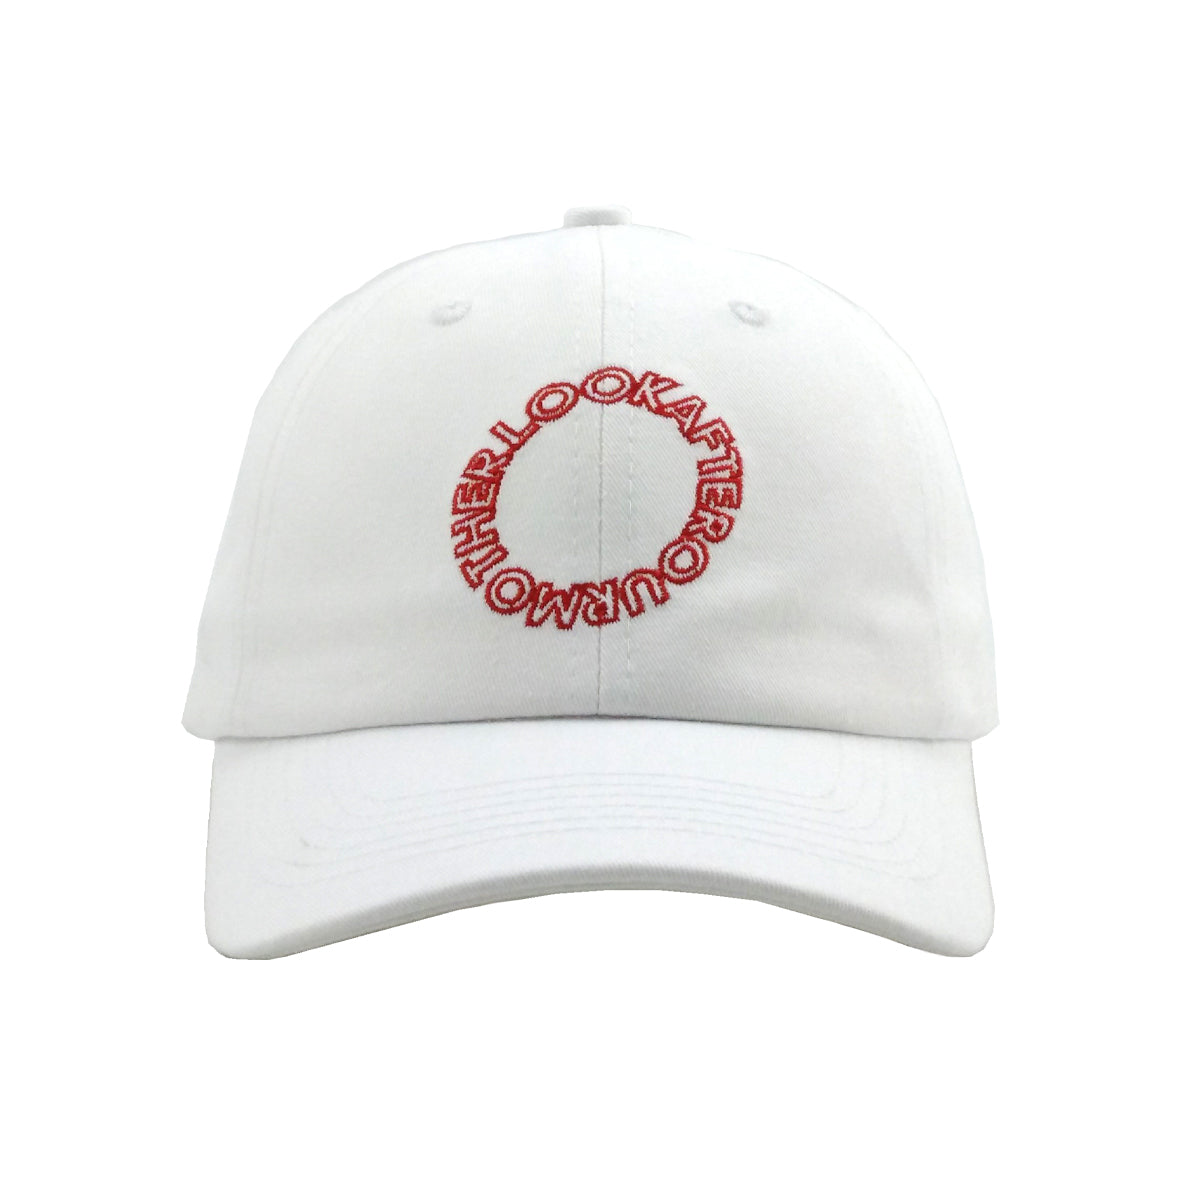 LOOK AFTER OUR MOTHER CAP / WHITE